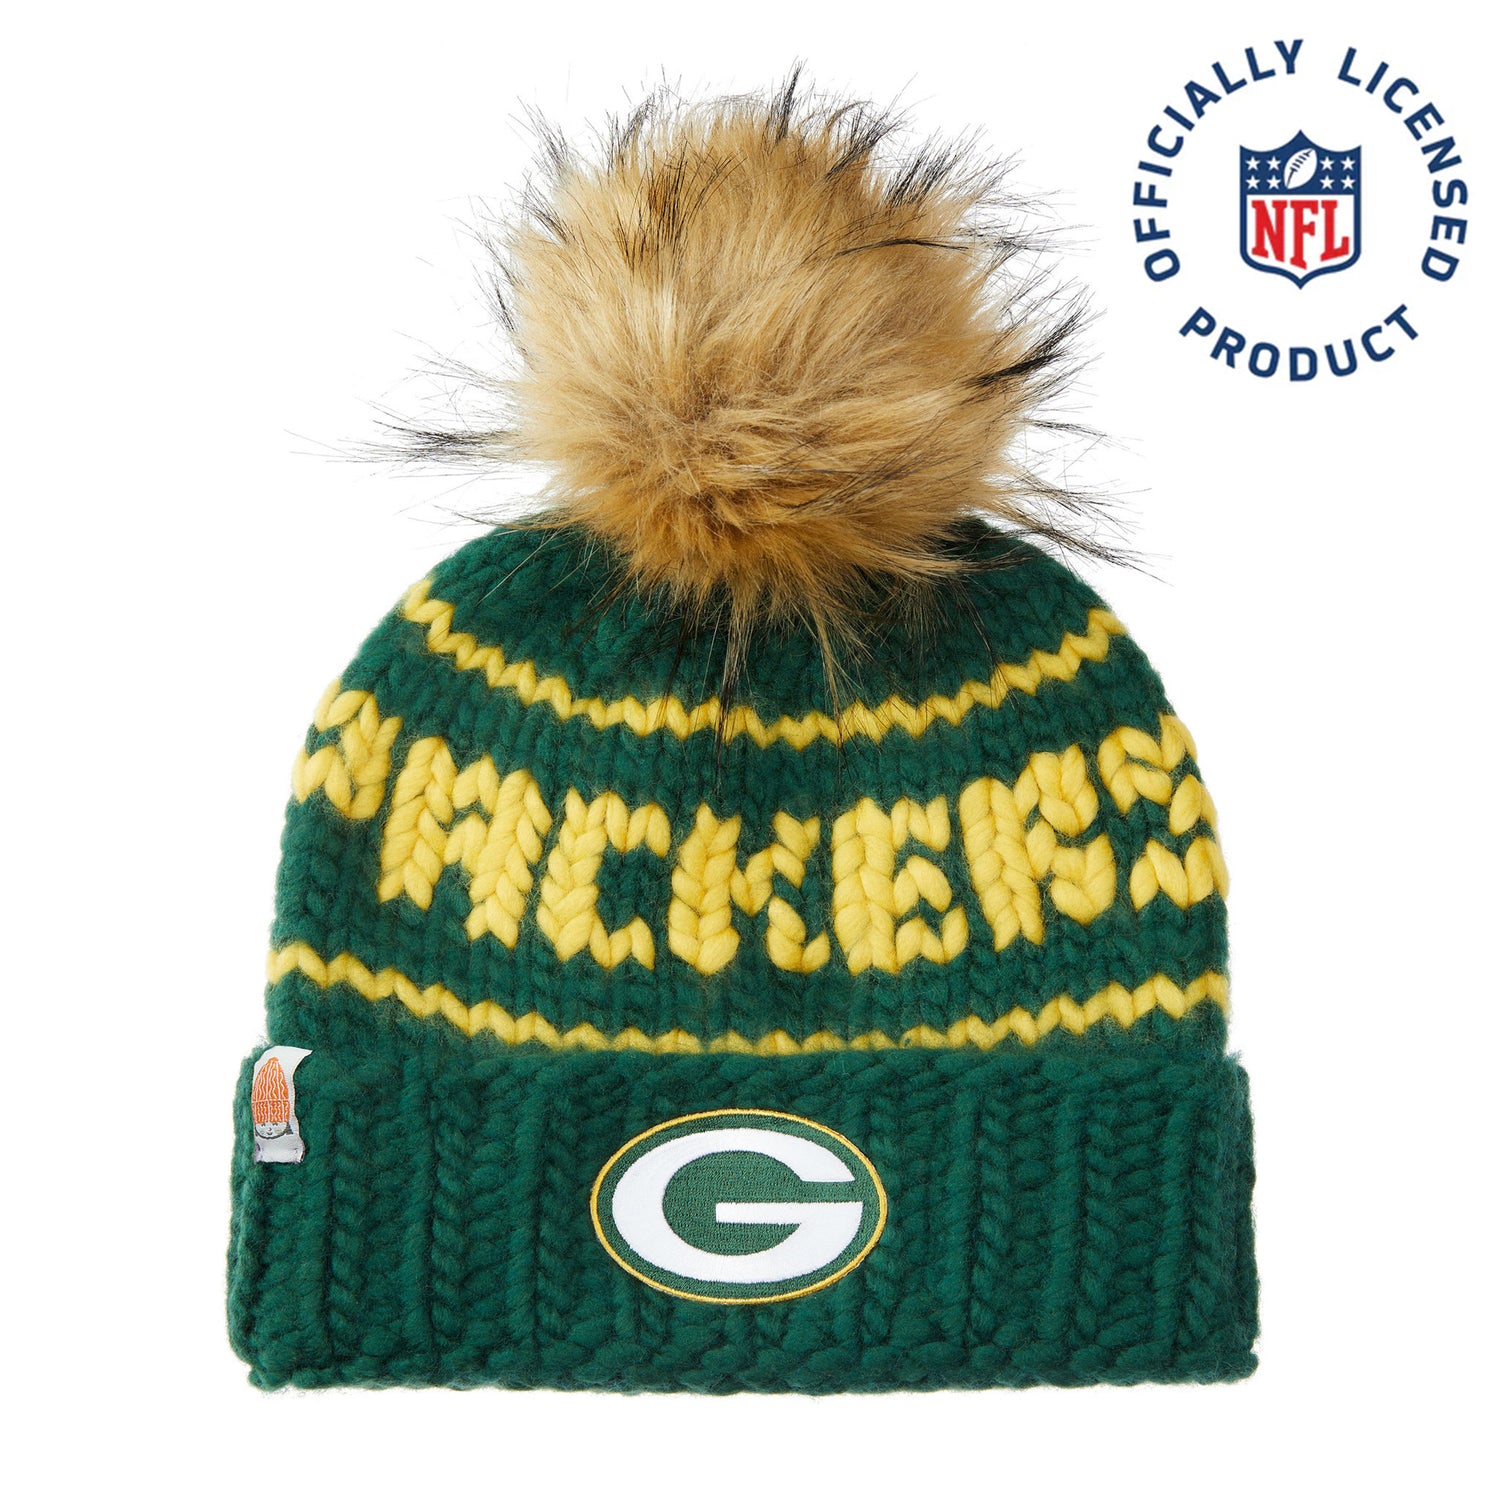 The Packers NFL Beanie with Faux Fur Pom